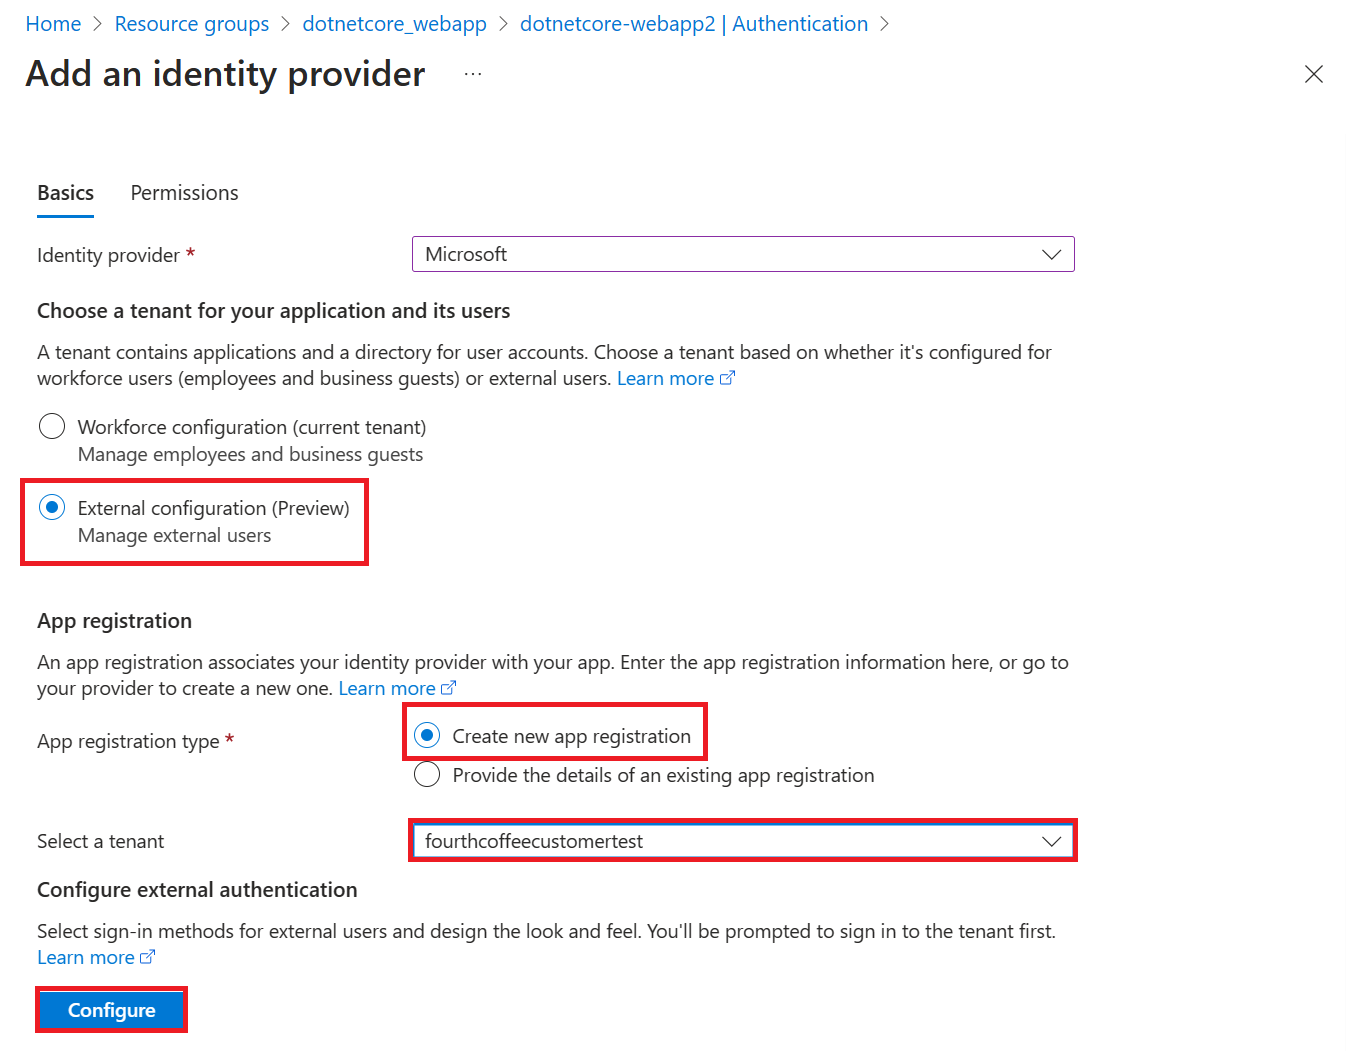 Screenshot that shows the Add an identity provider page.